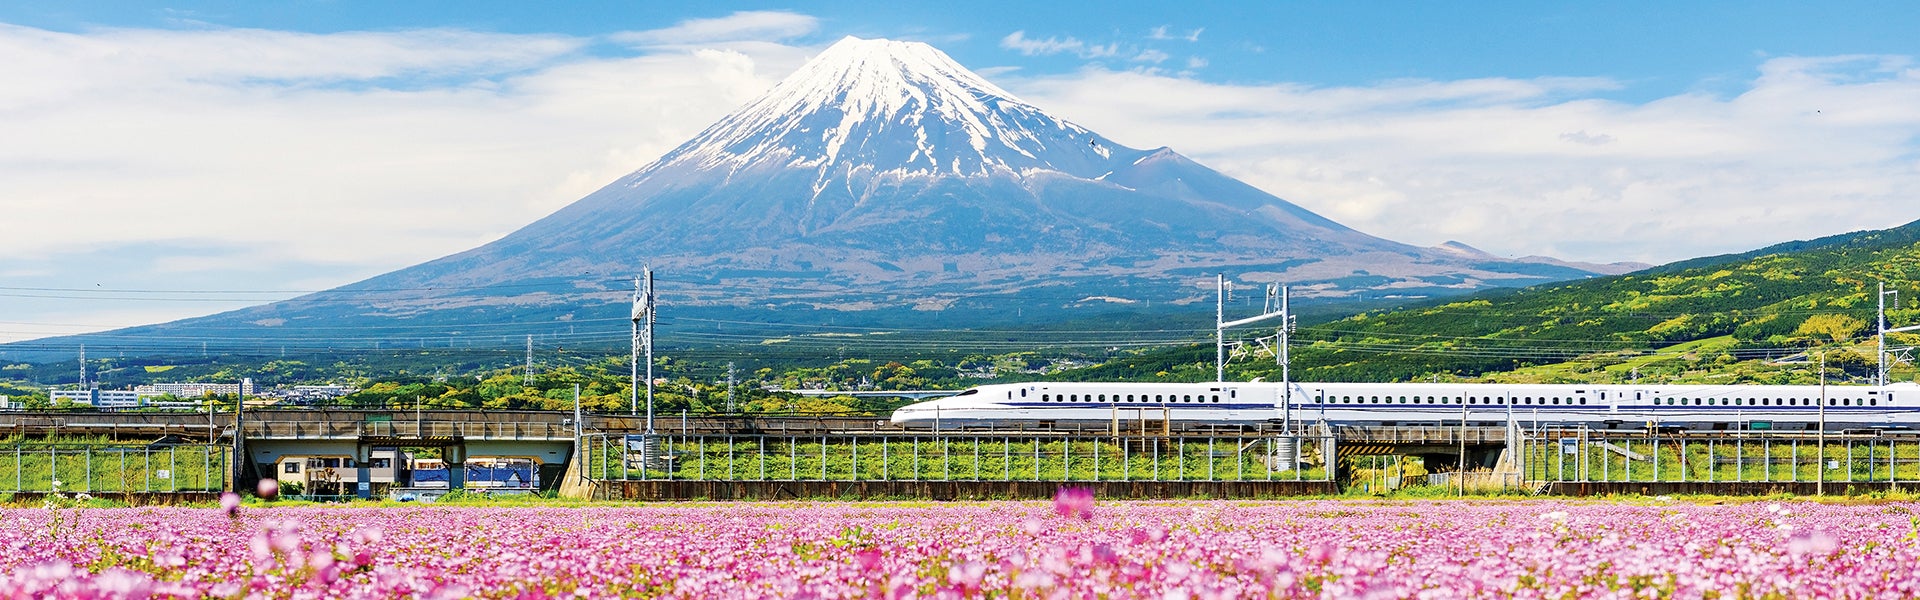 Bullet Train in front of a mountain